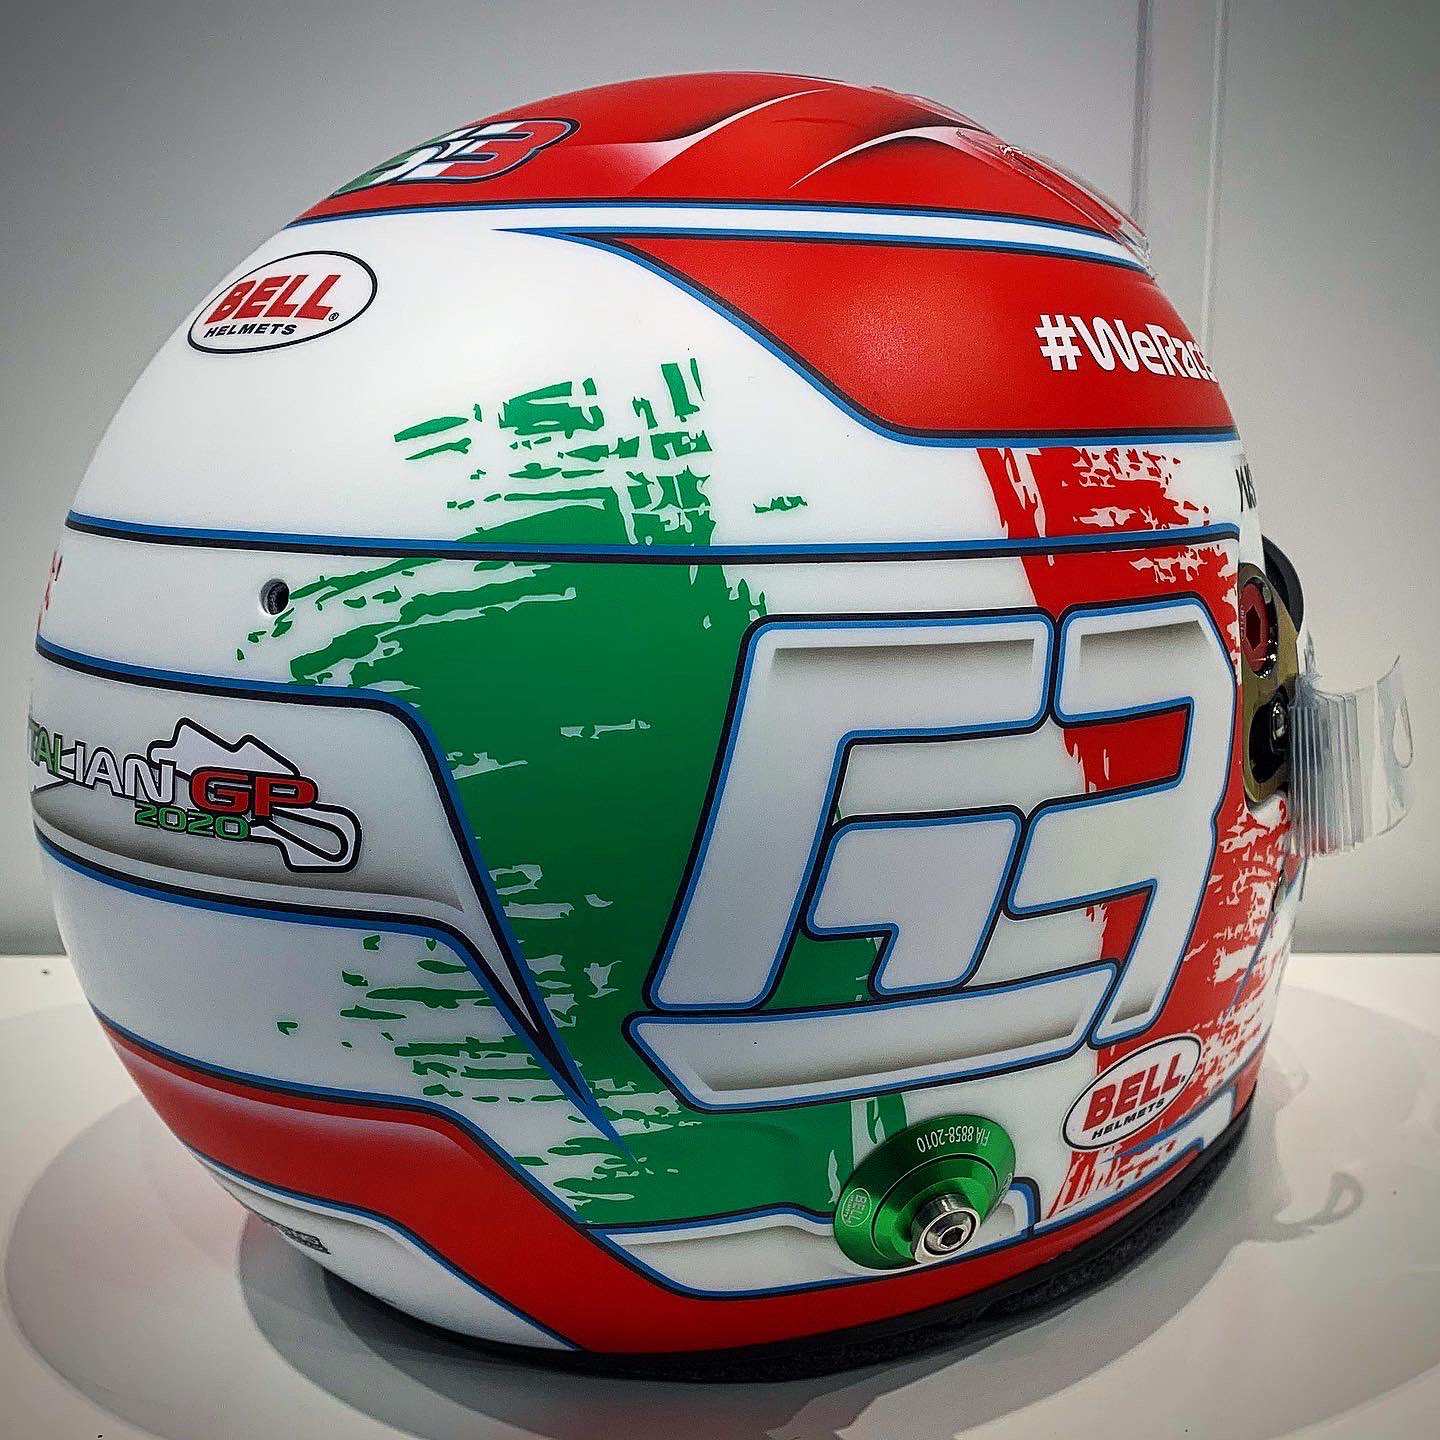 2020 Driver Helmets - Page 7 - F1technical.net